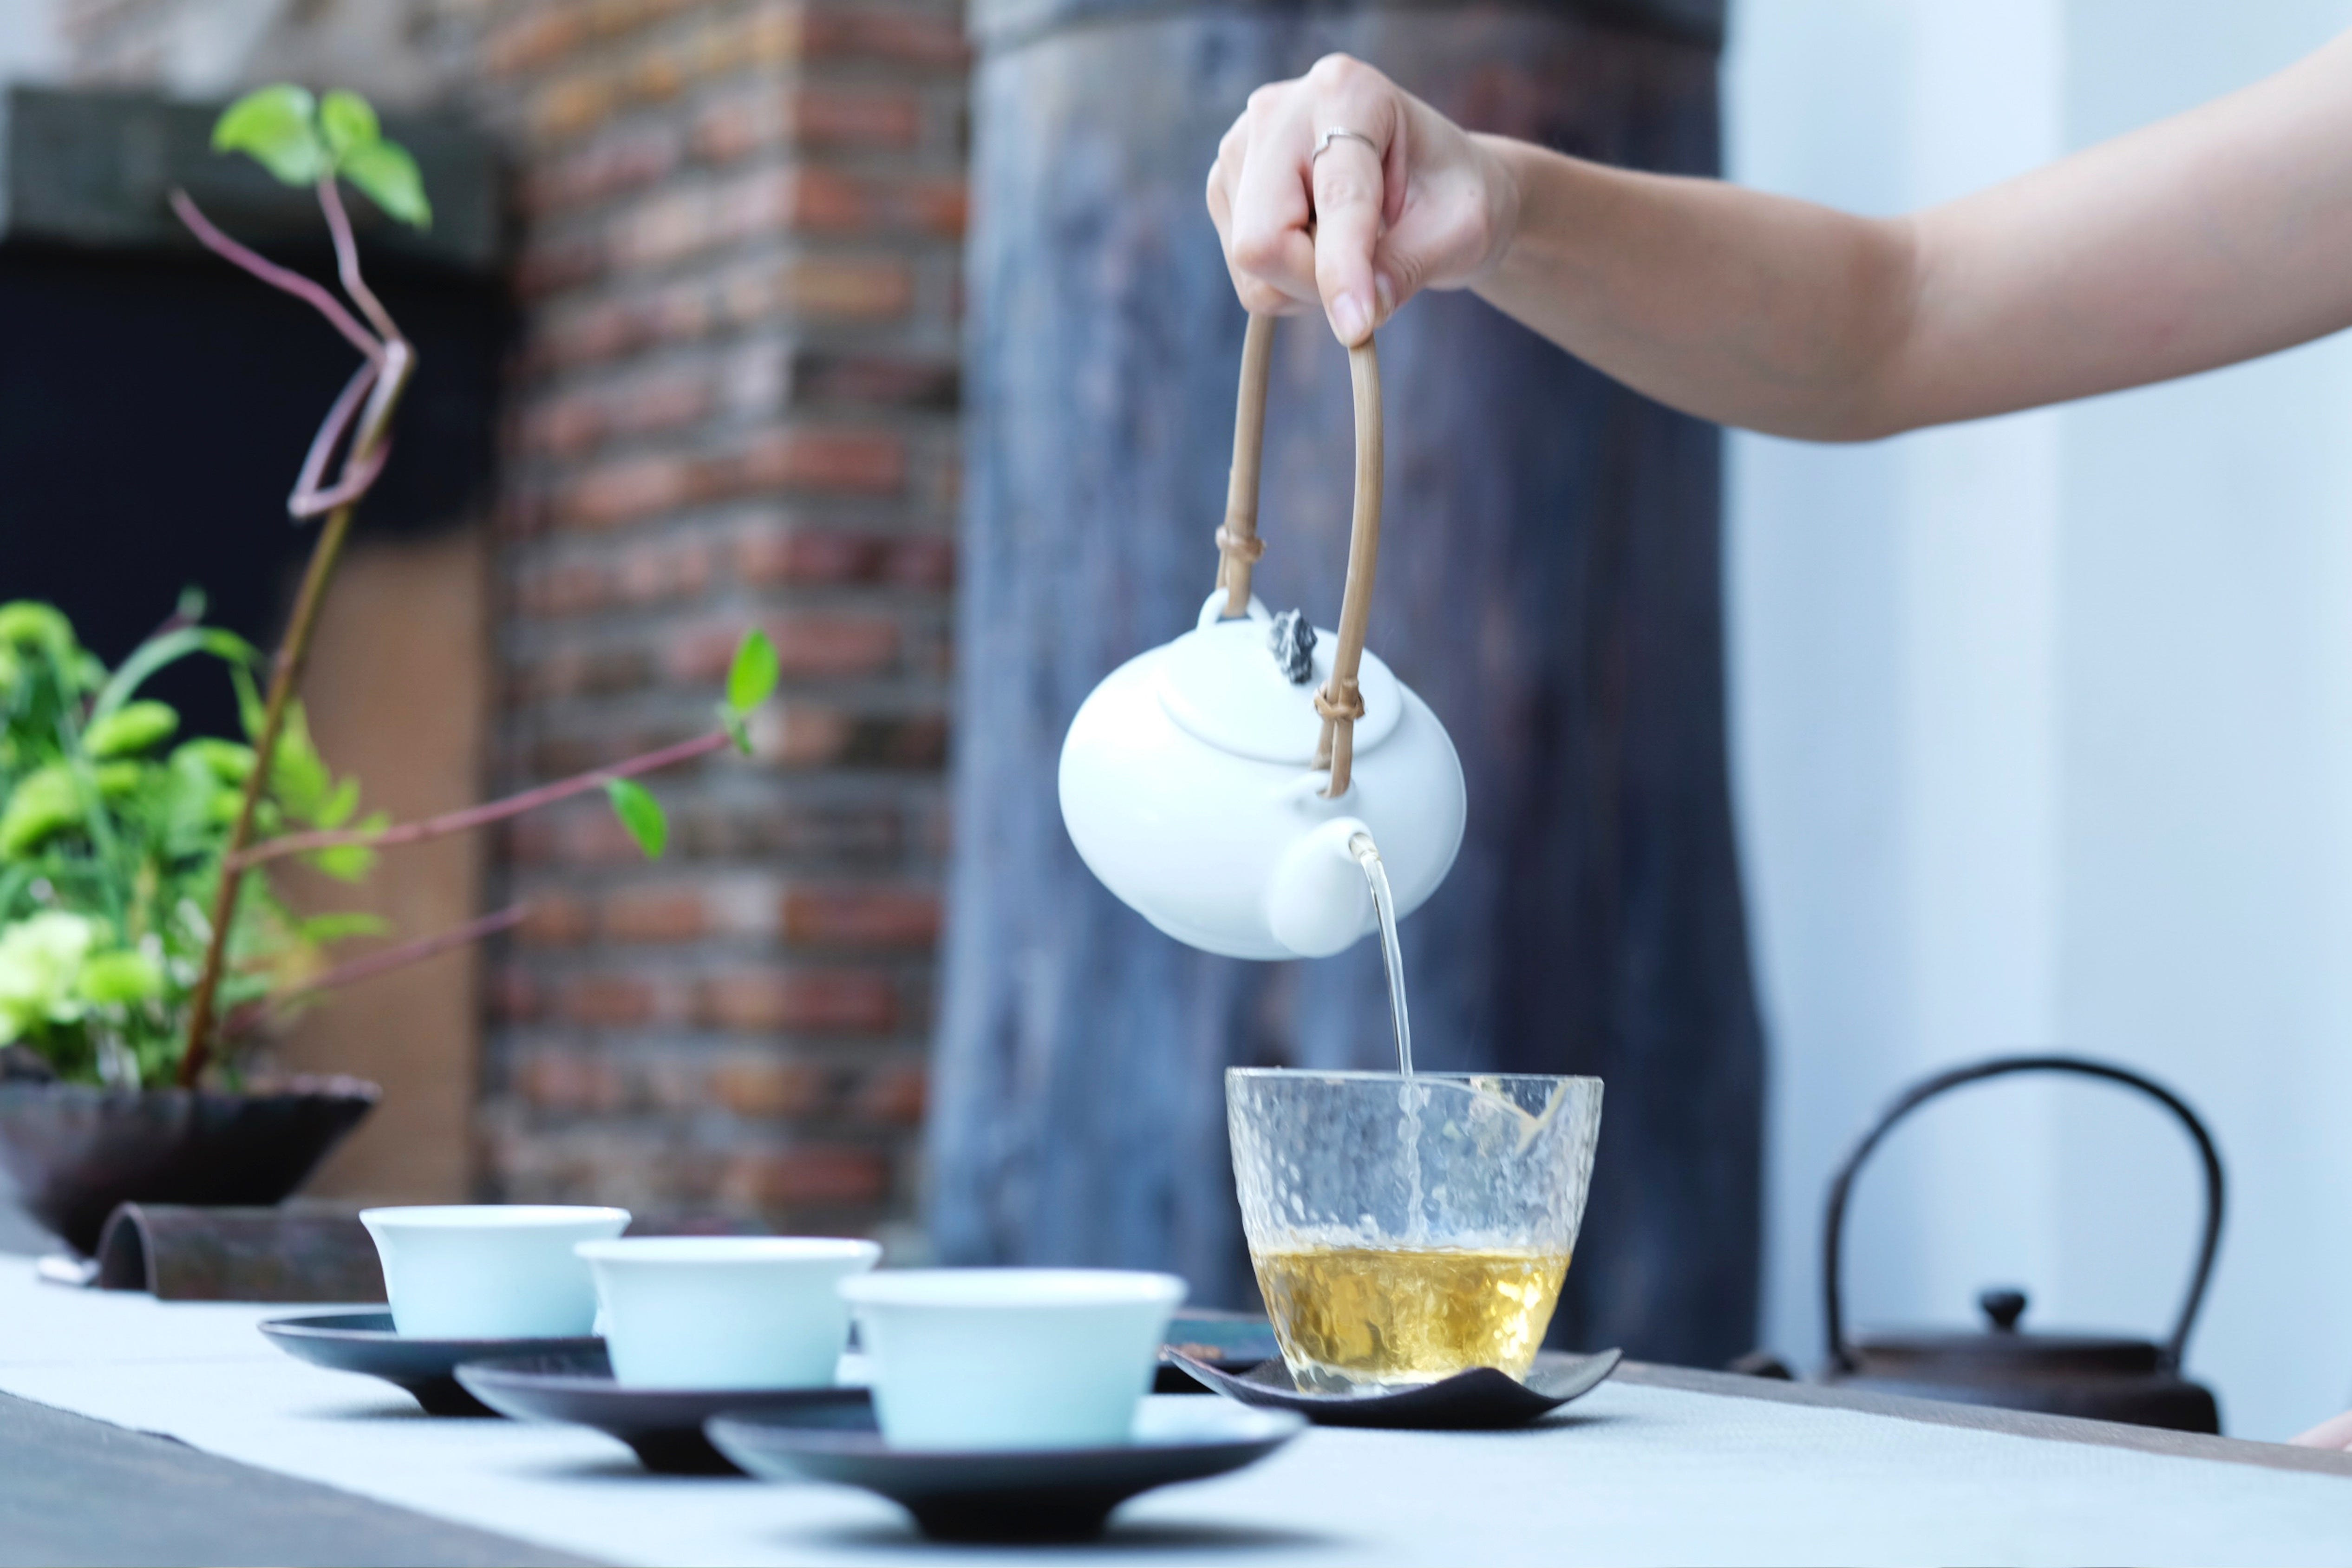 Empty Your Cup: A Zen Proverb on Opening Yourself to New Ideas